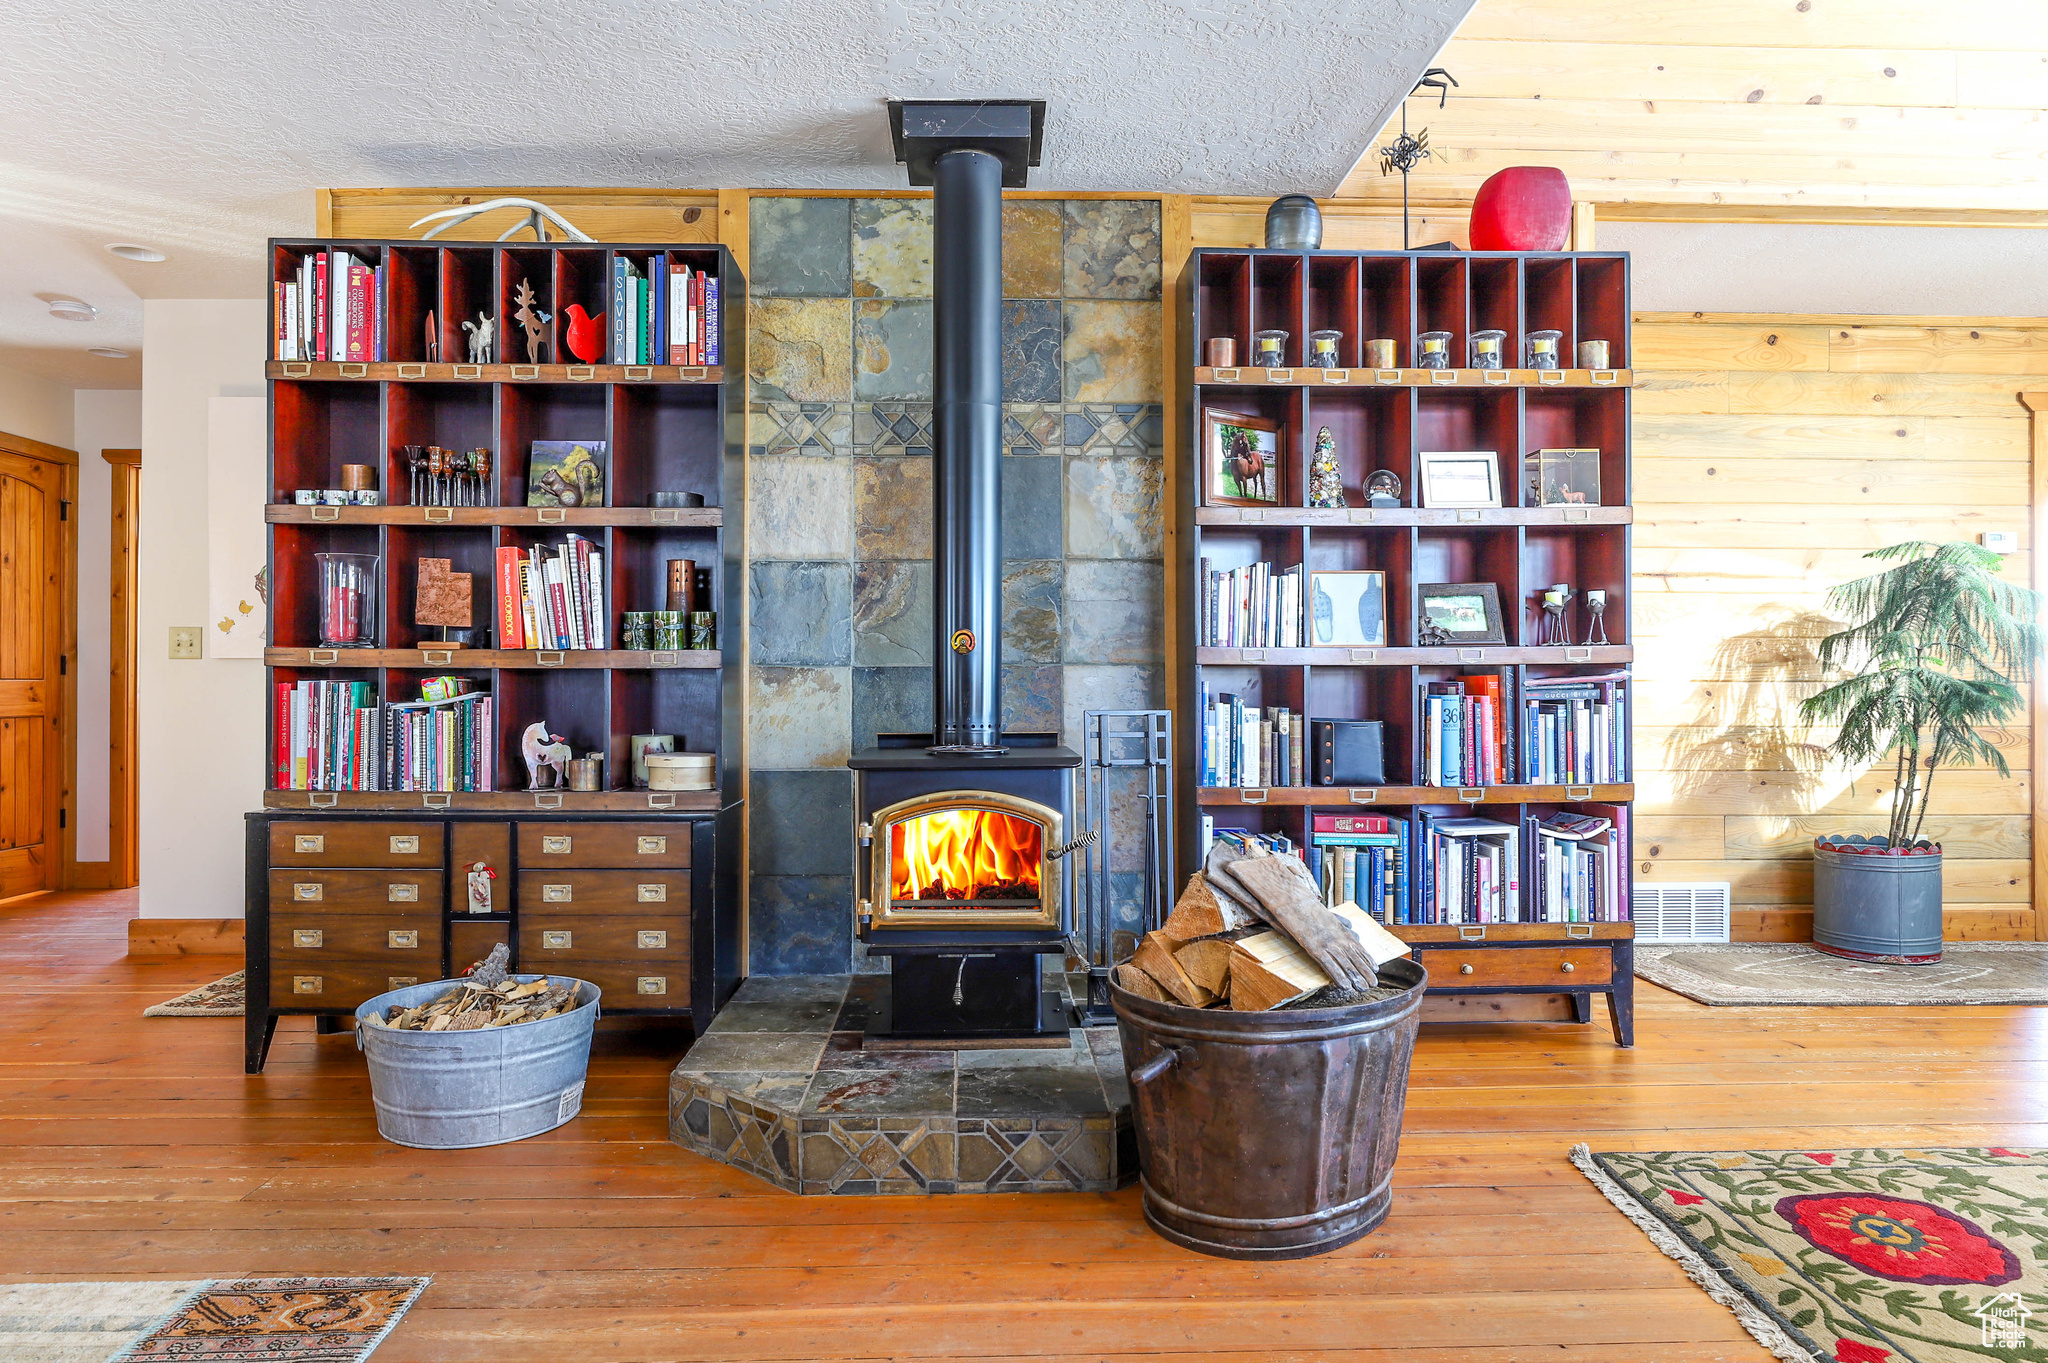 Details featuring a wood stove, a textured ceiling, and hardwood / wood-style flooring